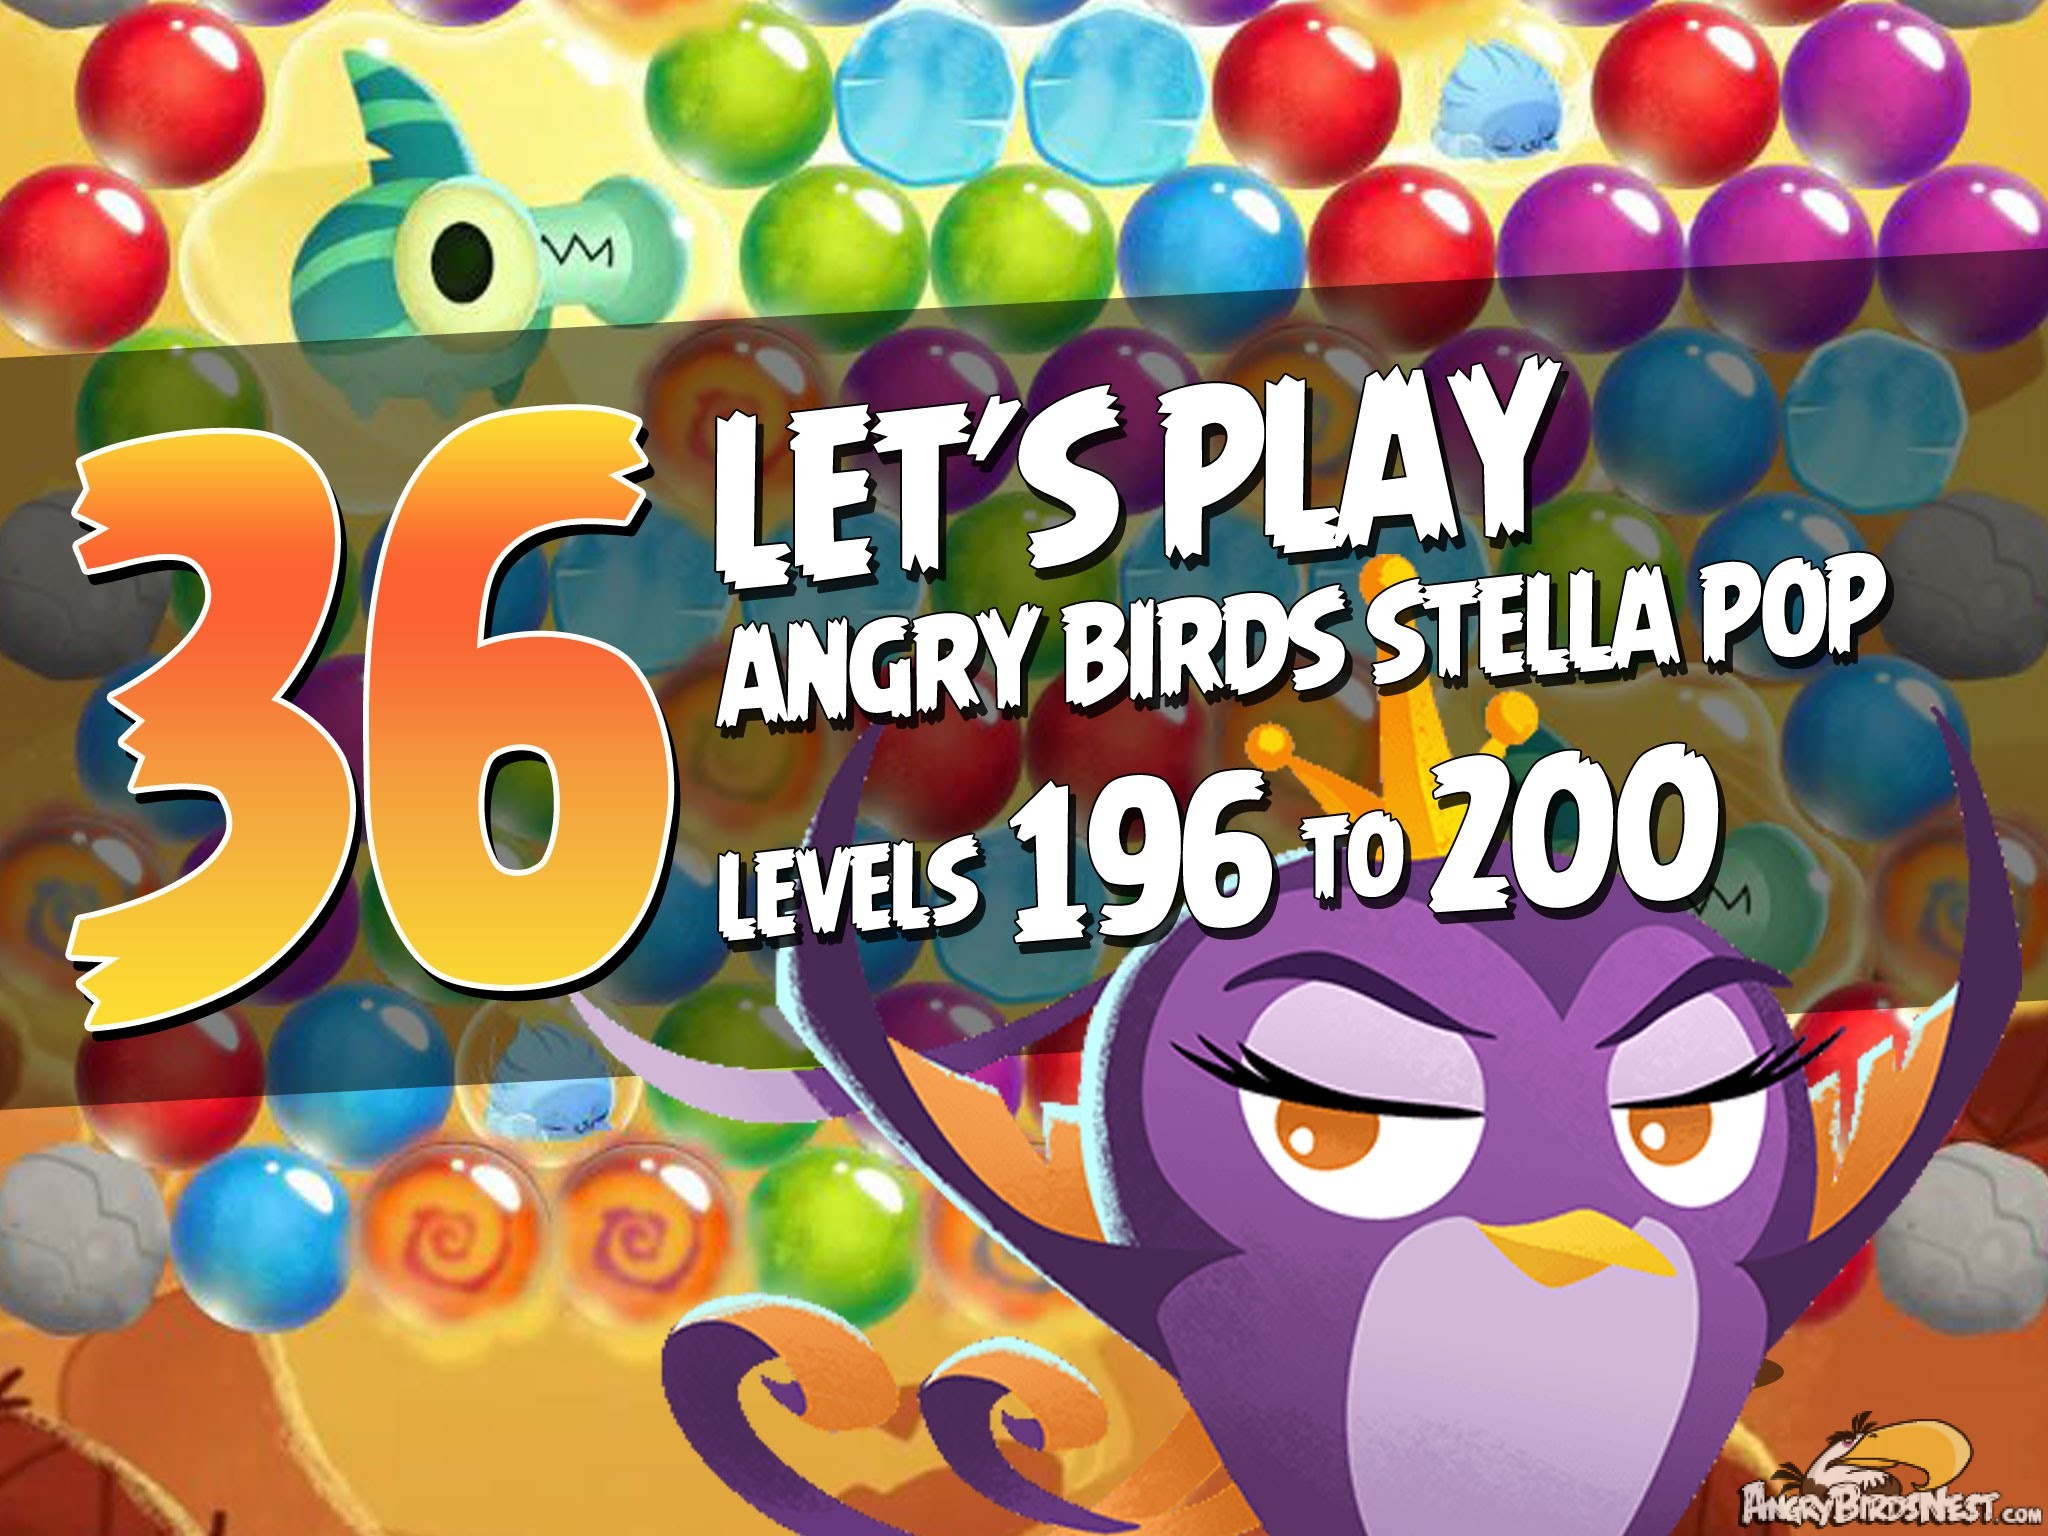 Angry Birds Stella Pop Let's Play Levels 196 to 200